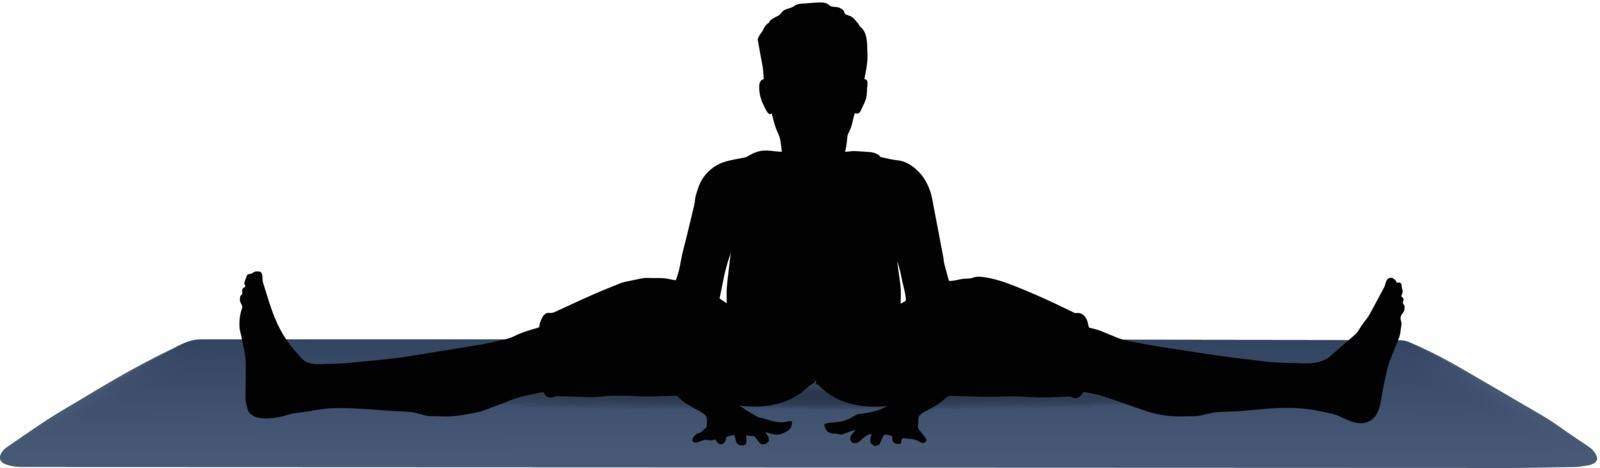 EPS 10 vector illustration of Yoga positions in Wide Angle Bend pose